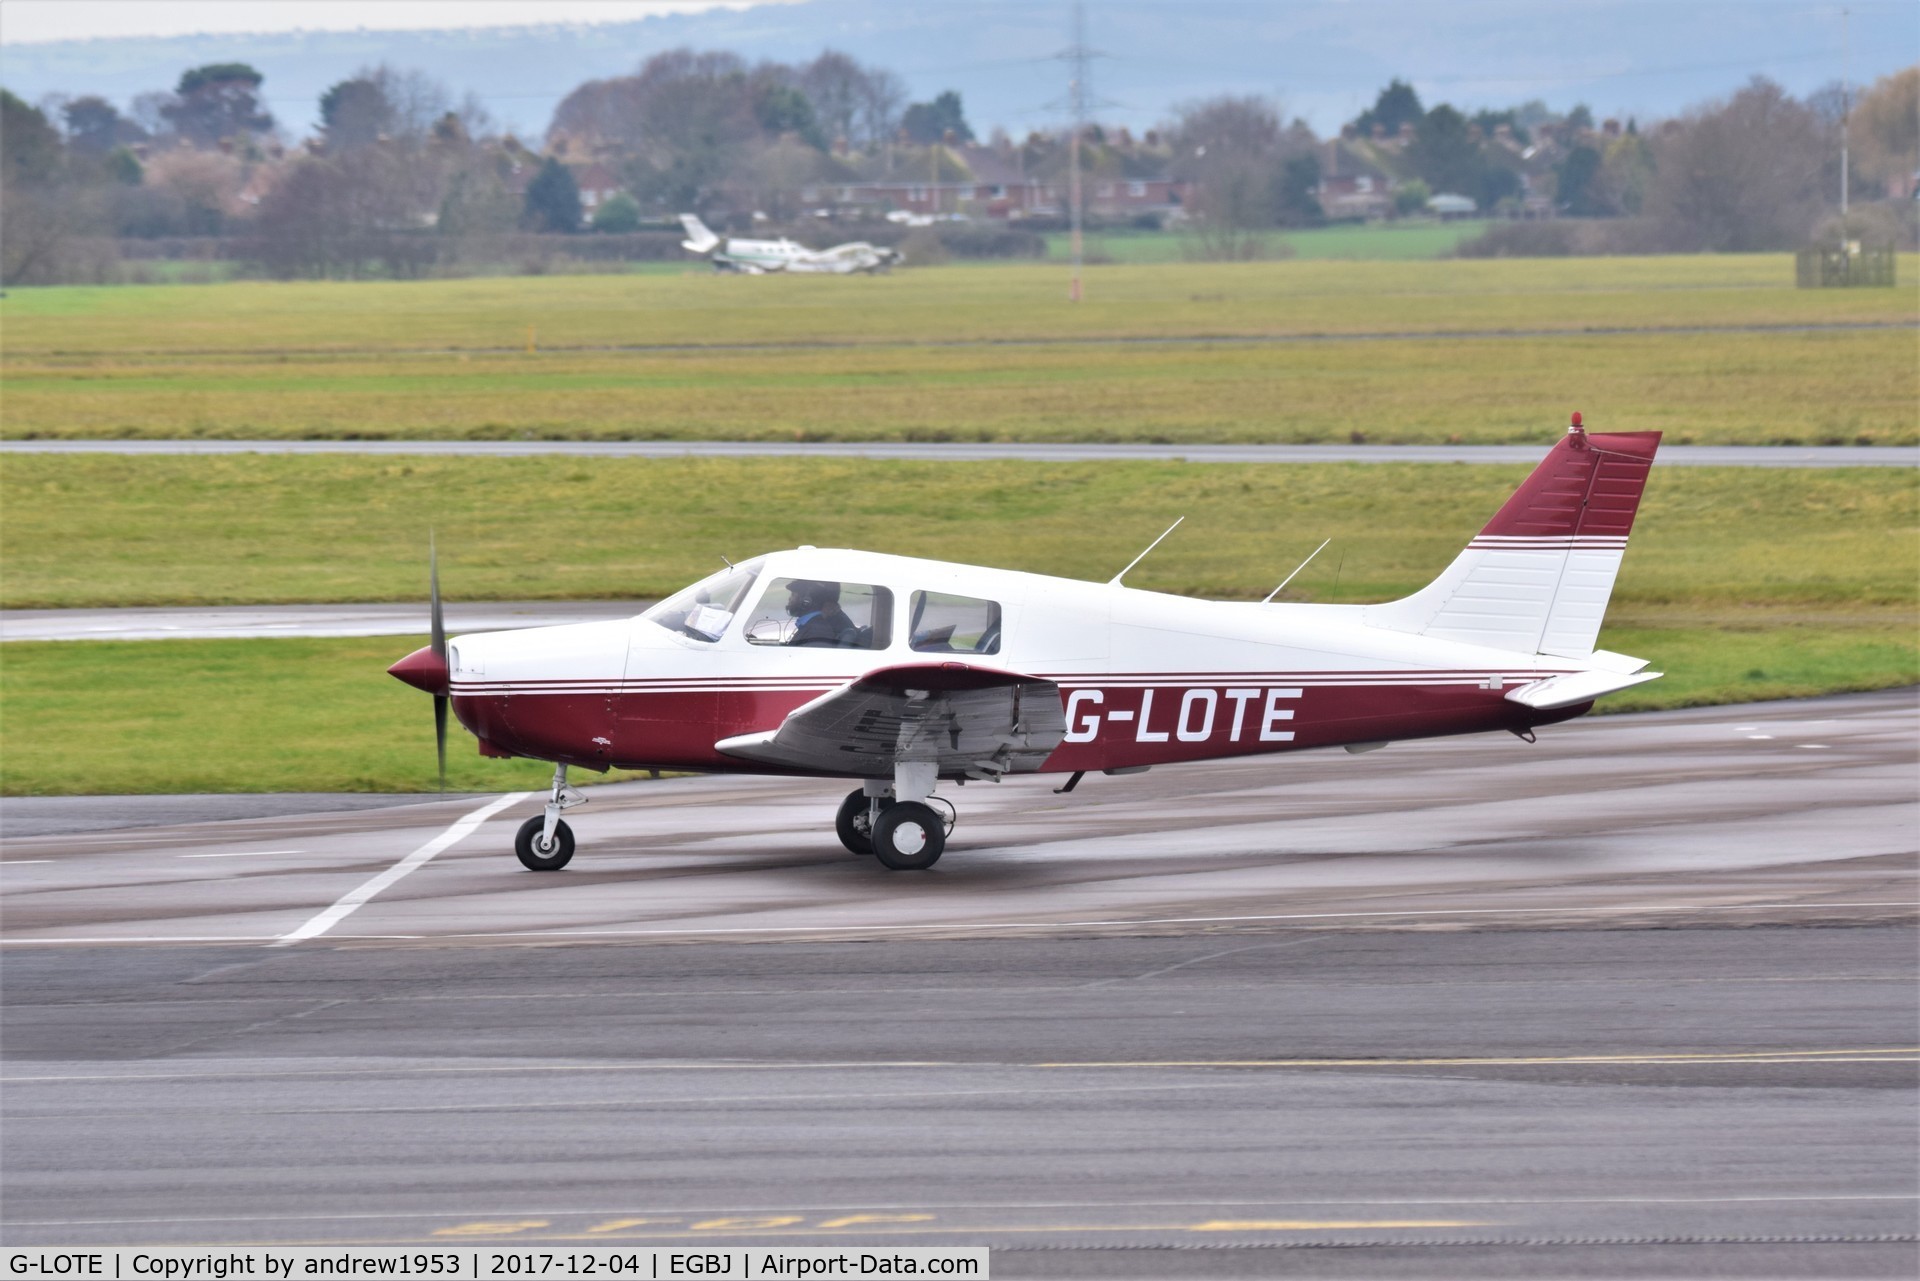 G-LOTE, 1989 Piper PA-28-161 Cadet C/N 2841089, G-LOTE at Gloucestershire Airport.